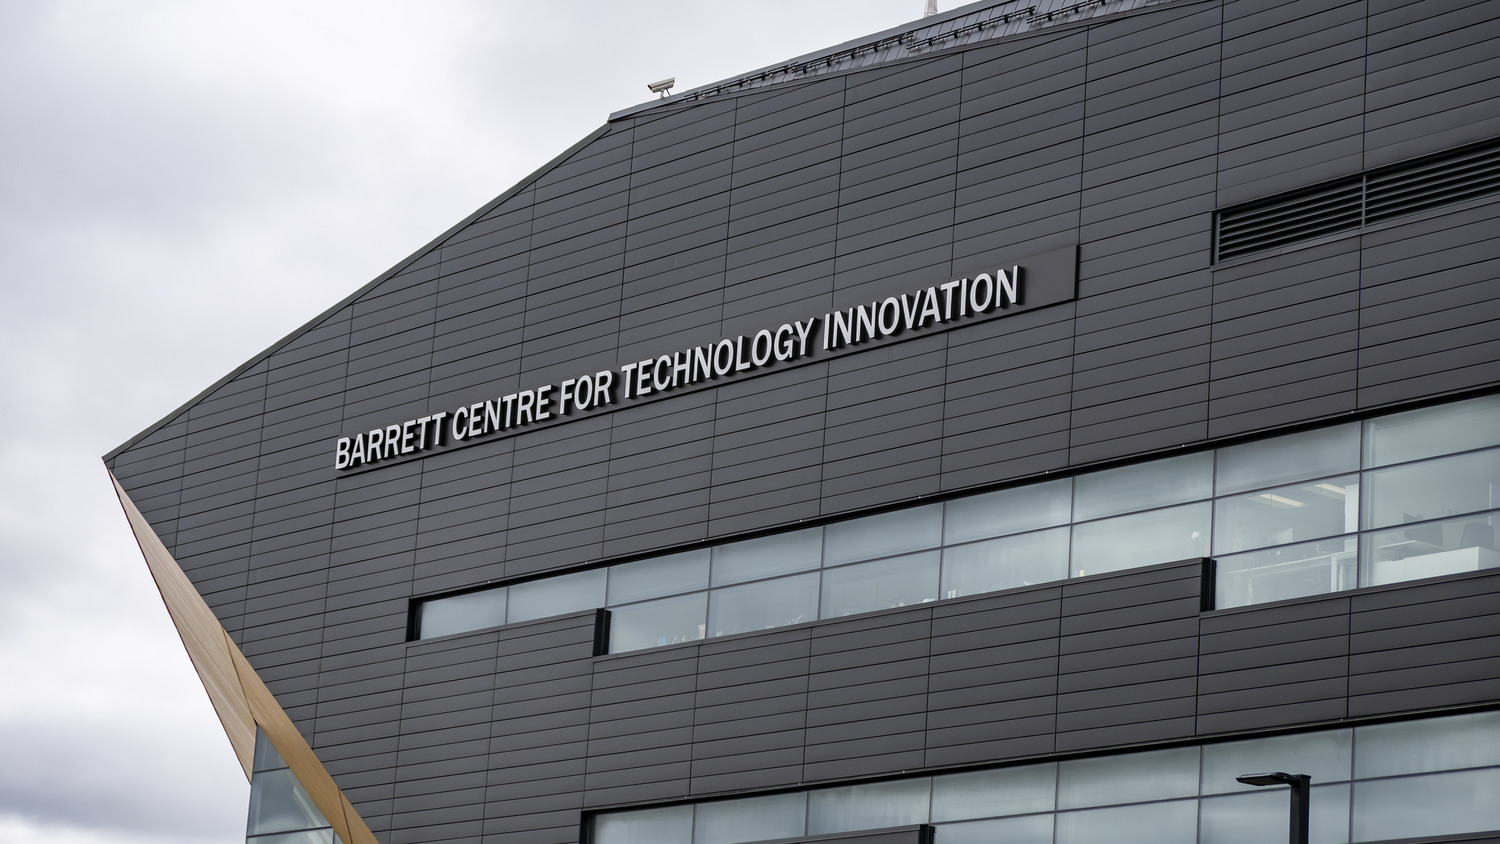 Modern architectural design of the barrett centre for technology innovation against a cloudy sky.